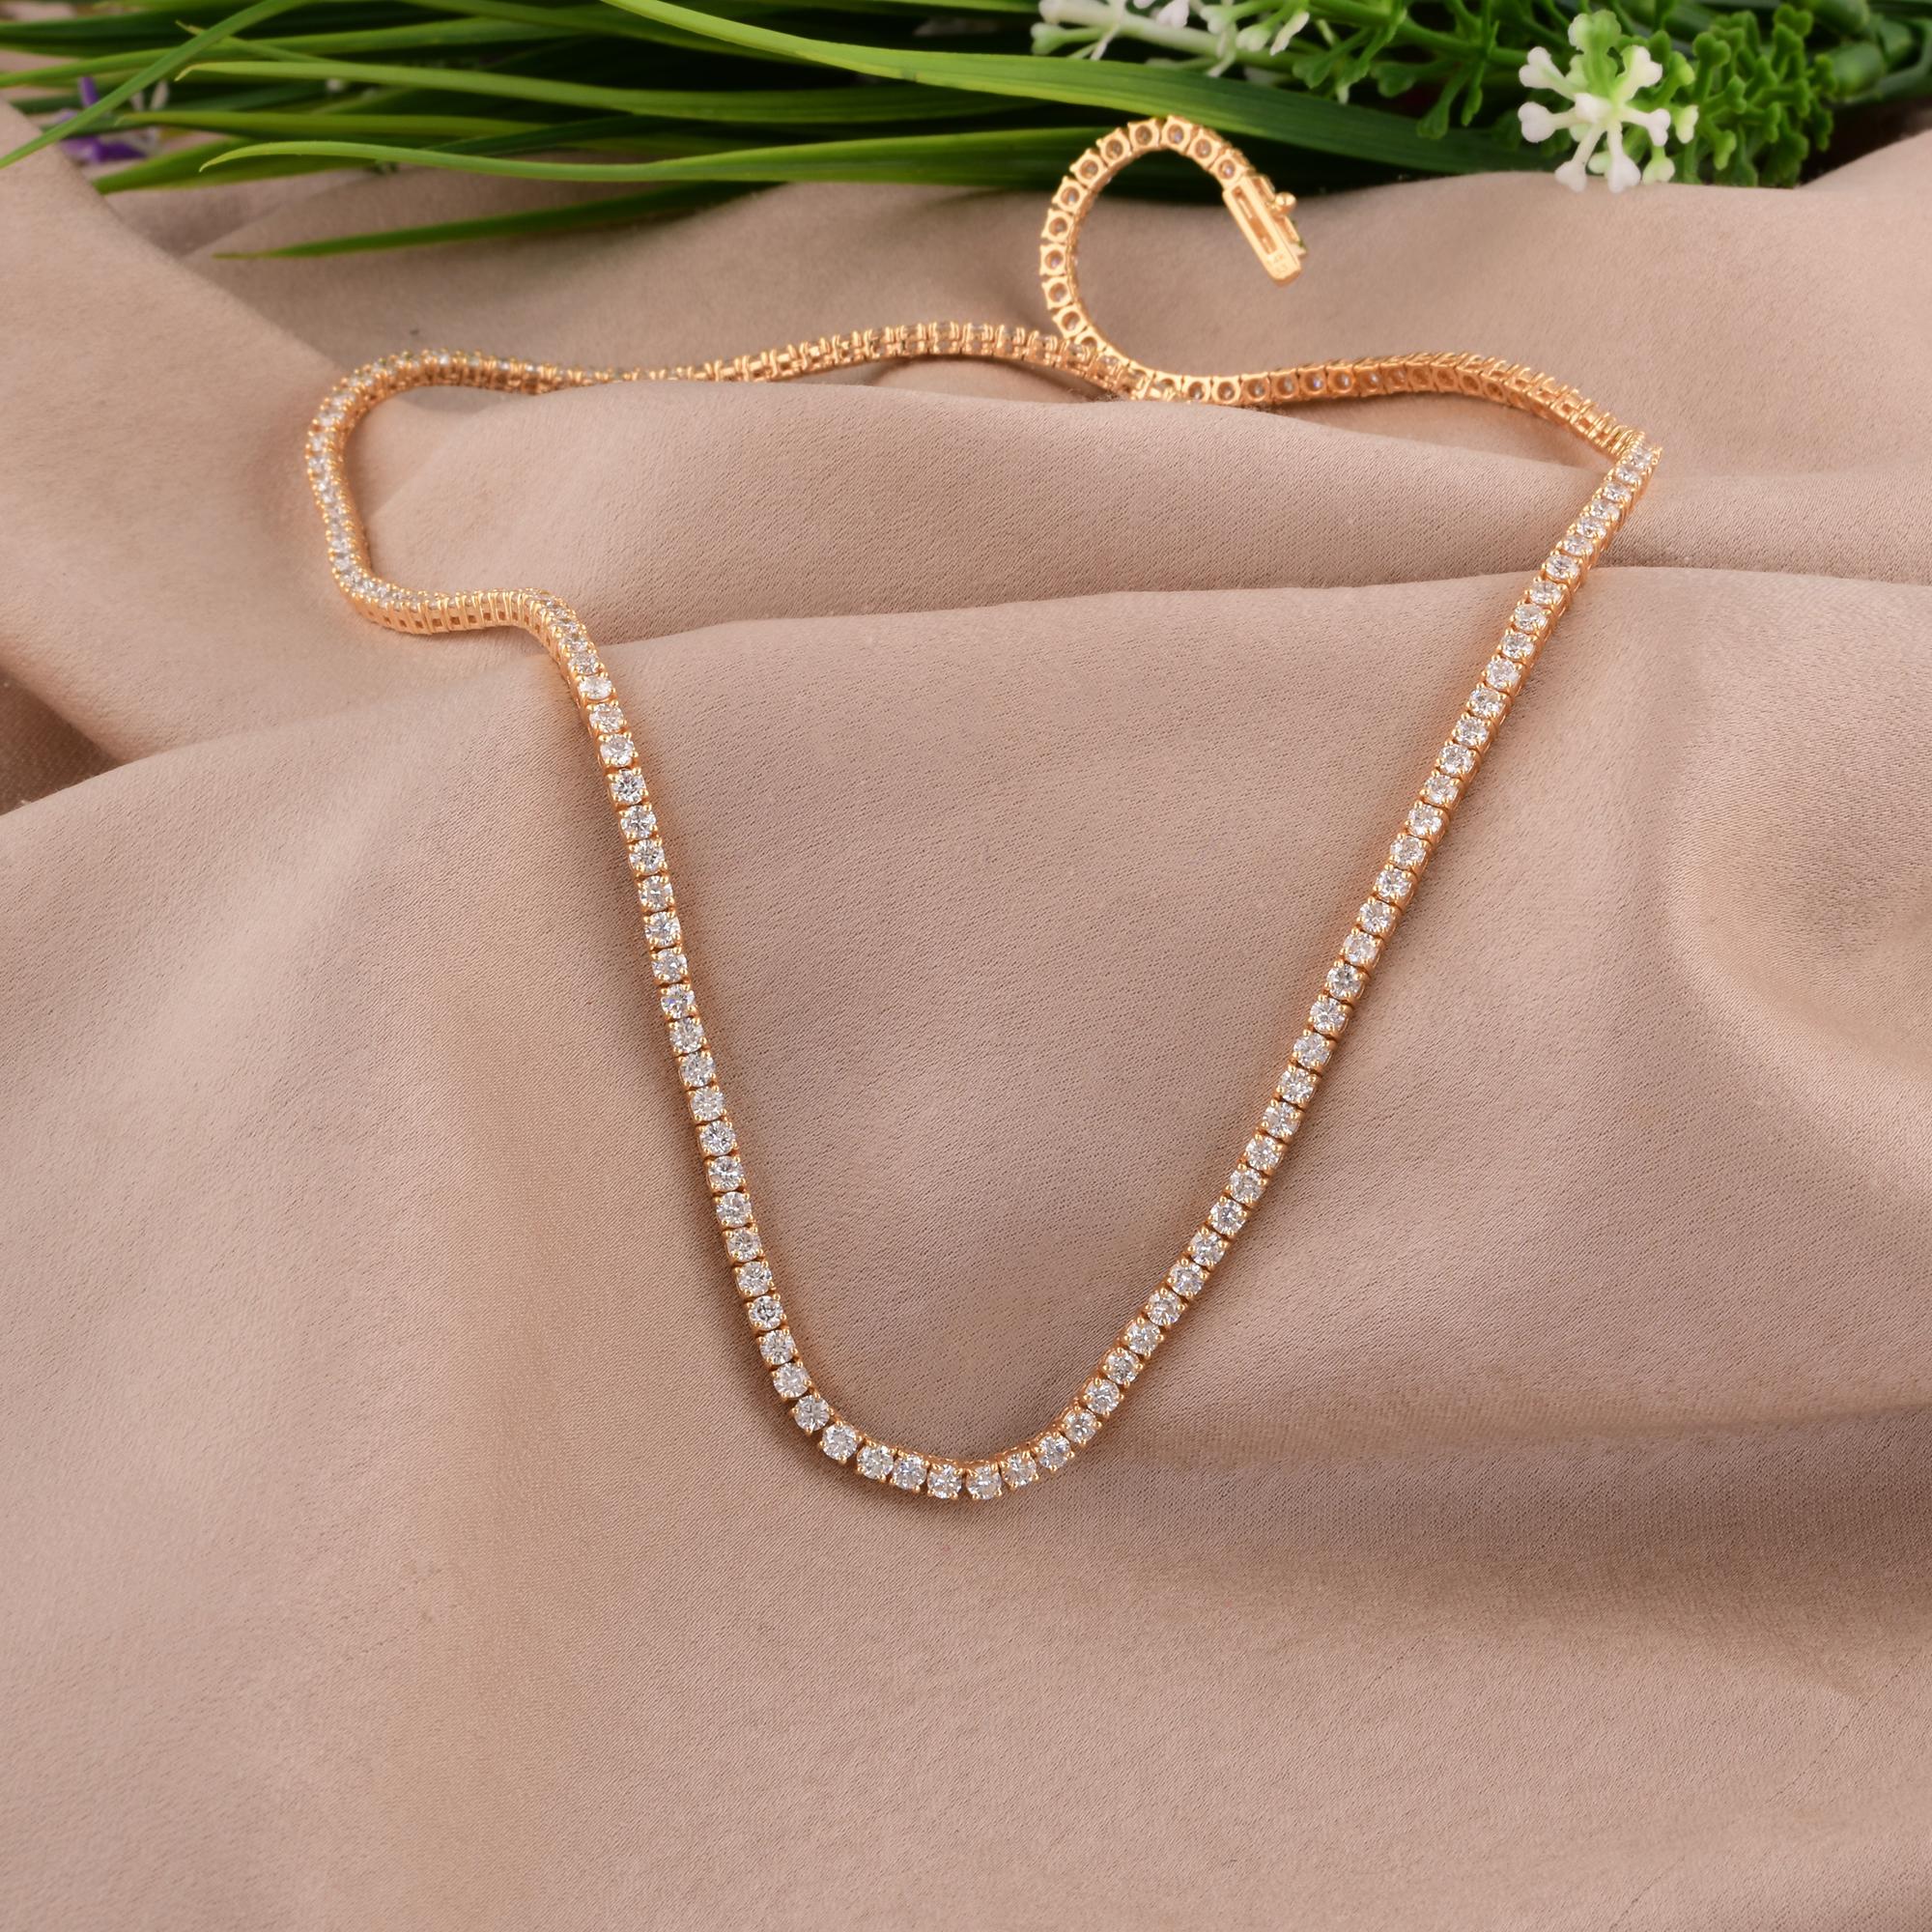 Introducing our magnificent Natural 6.60 Carat Diamond Tennis Necklace, a stunning display of elegance and luxury, meticulously crafted from 14 karat yellow gold. This necklace is more than just a piece of jewelry; it's a statement of sophistication